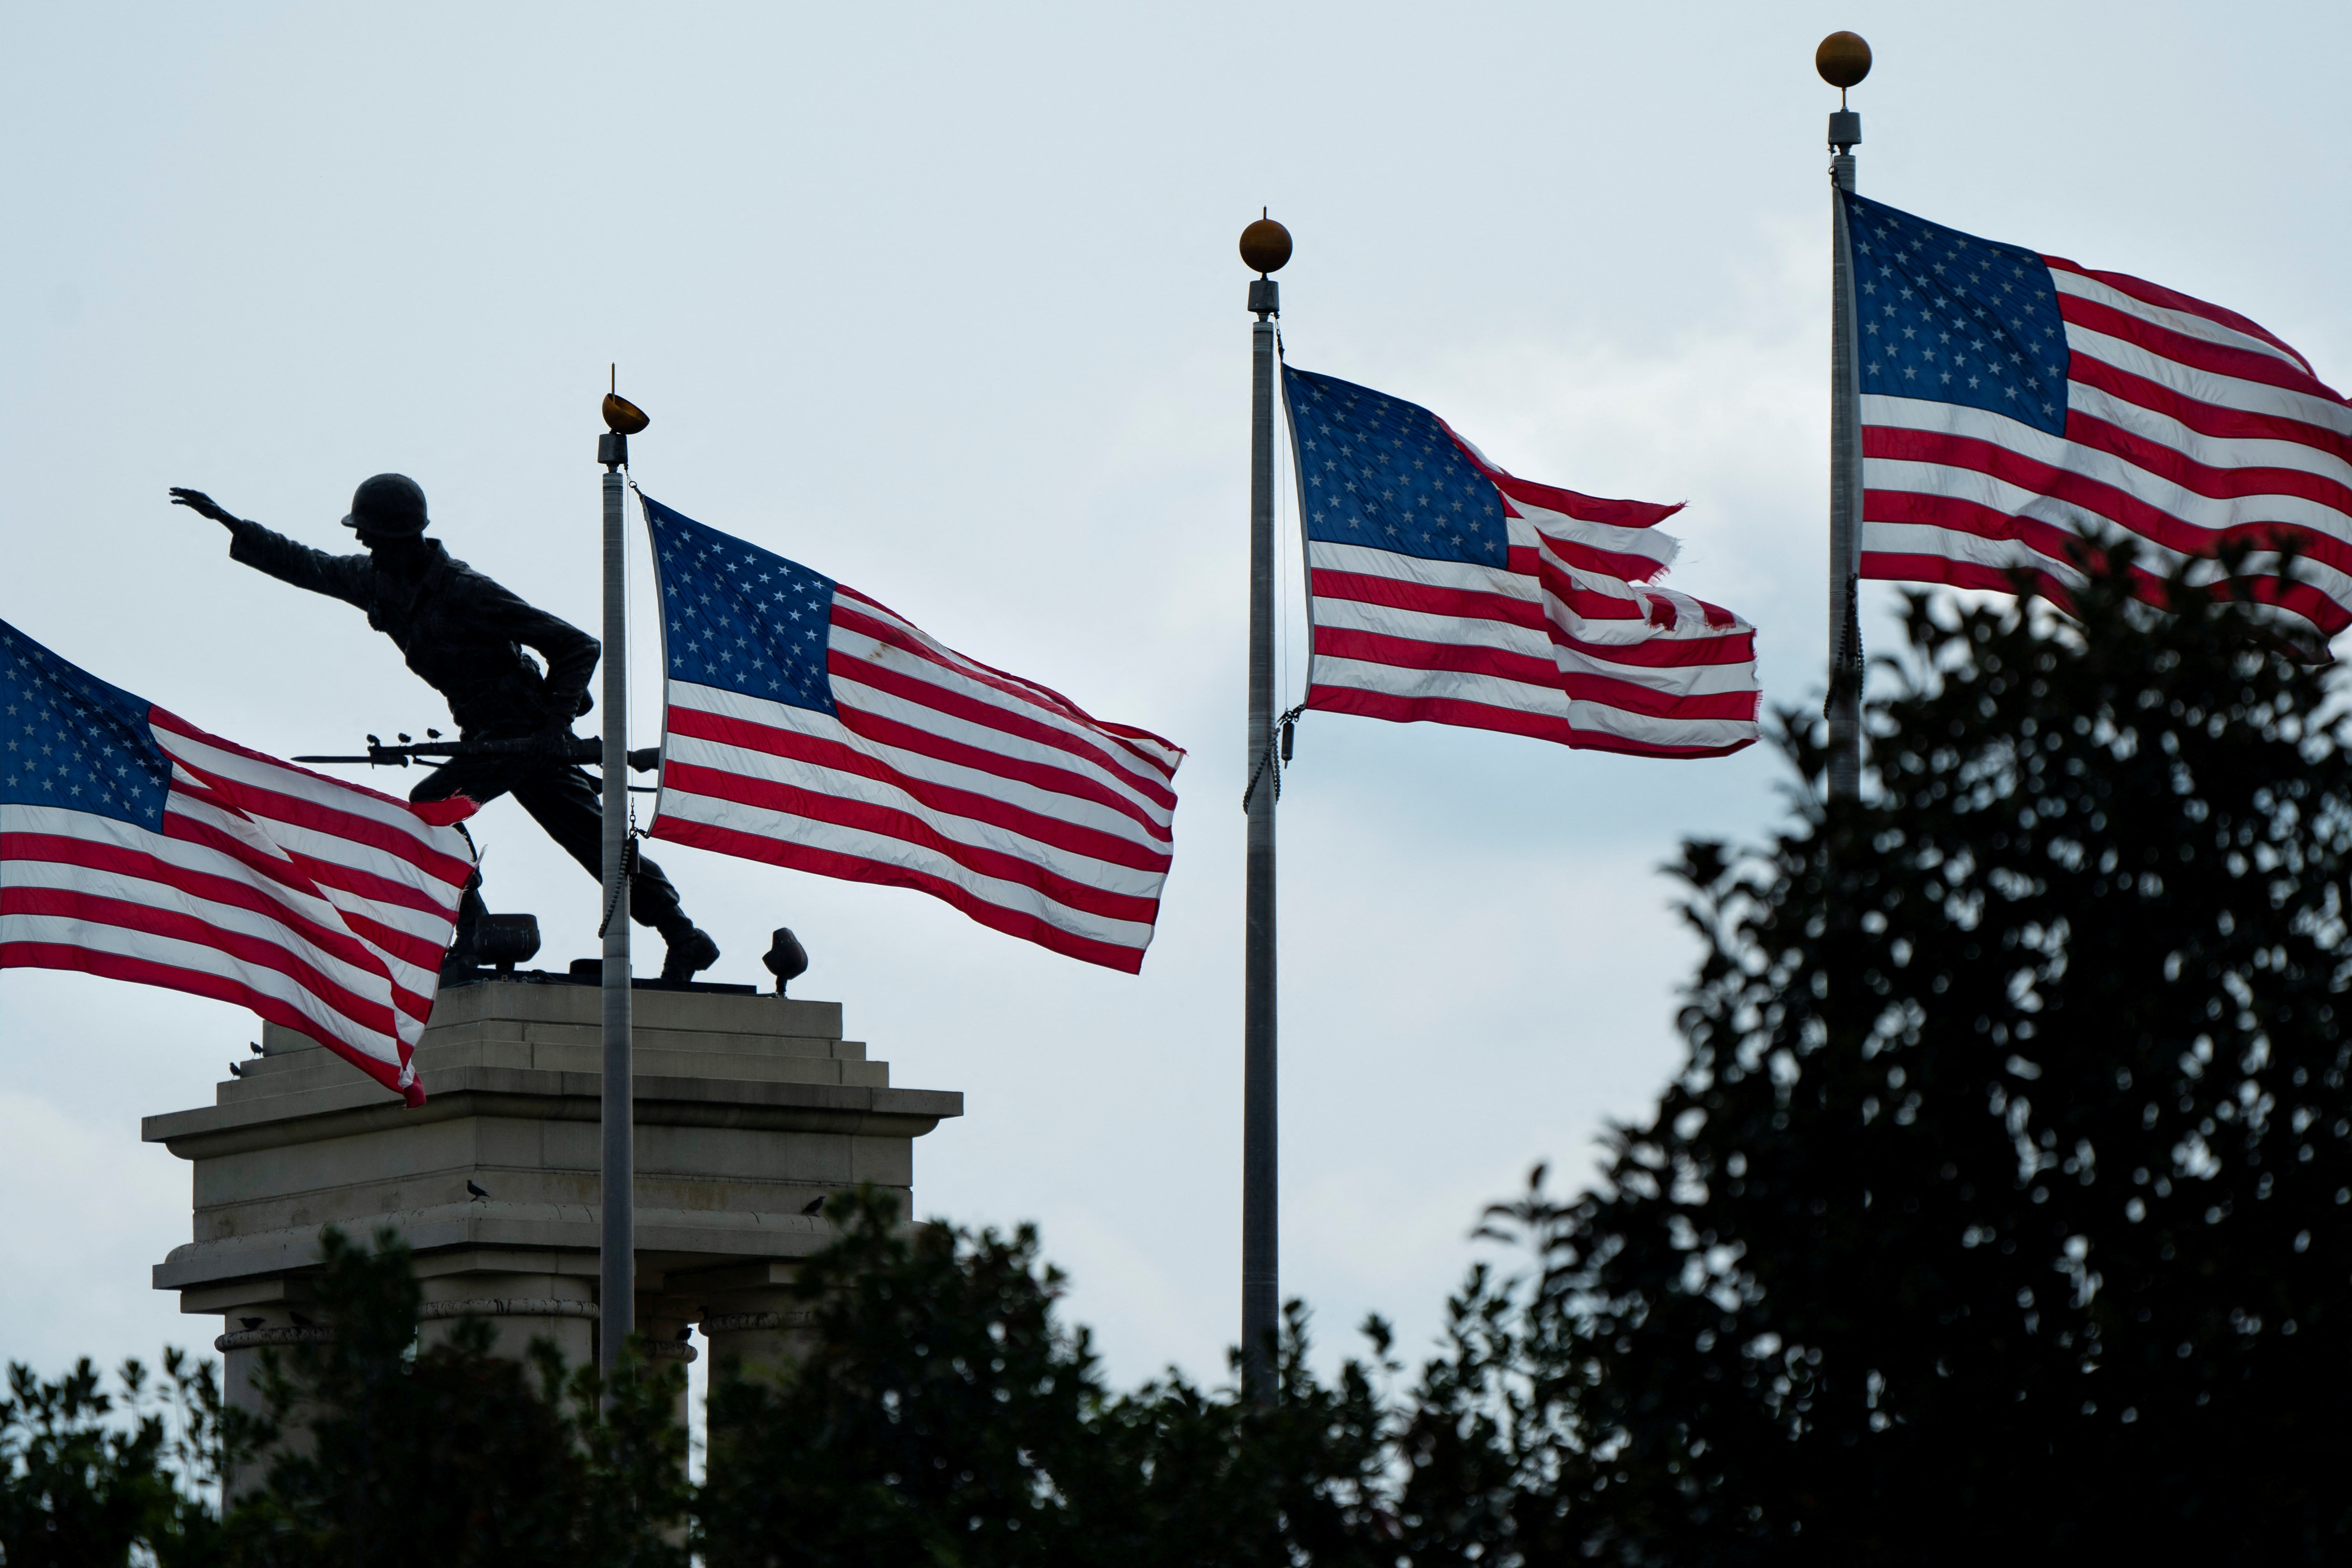 Flags and a monument are seen at the entrance to Fort Benning in Columbus